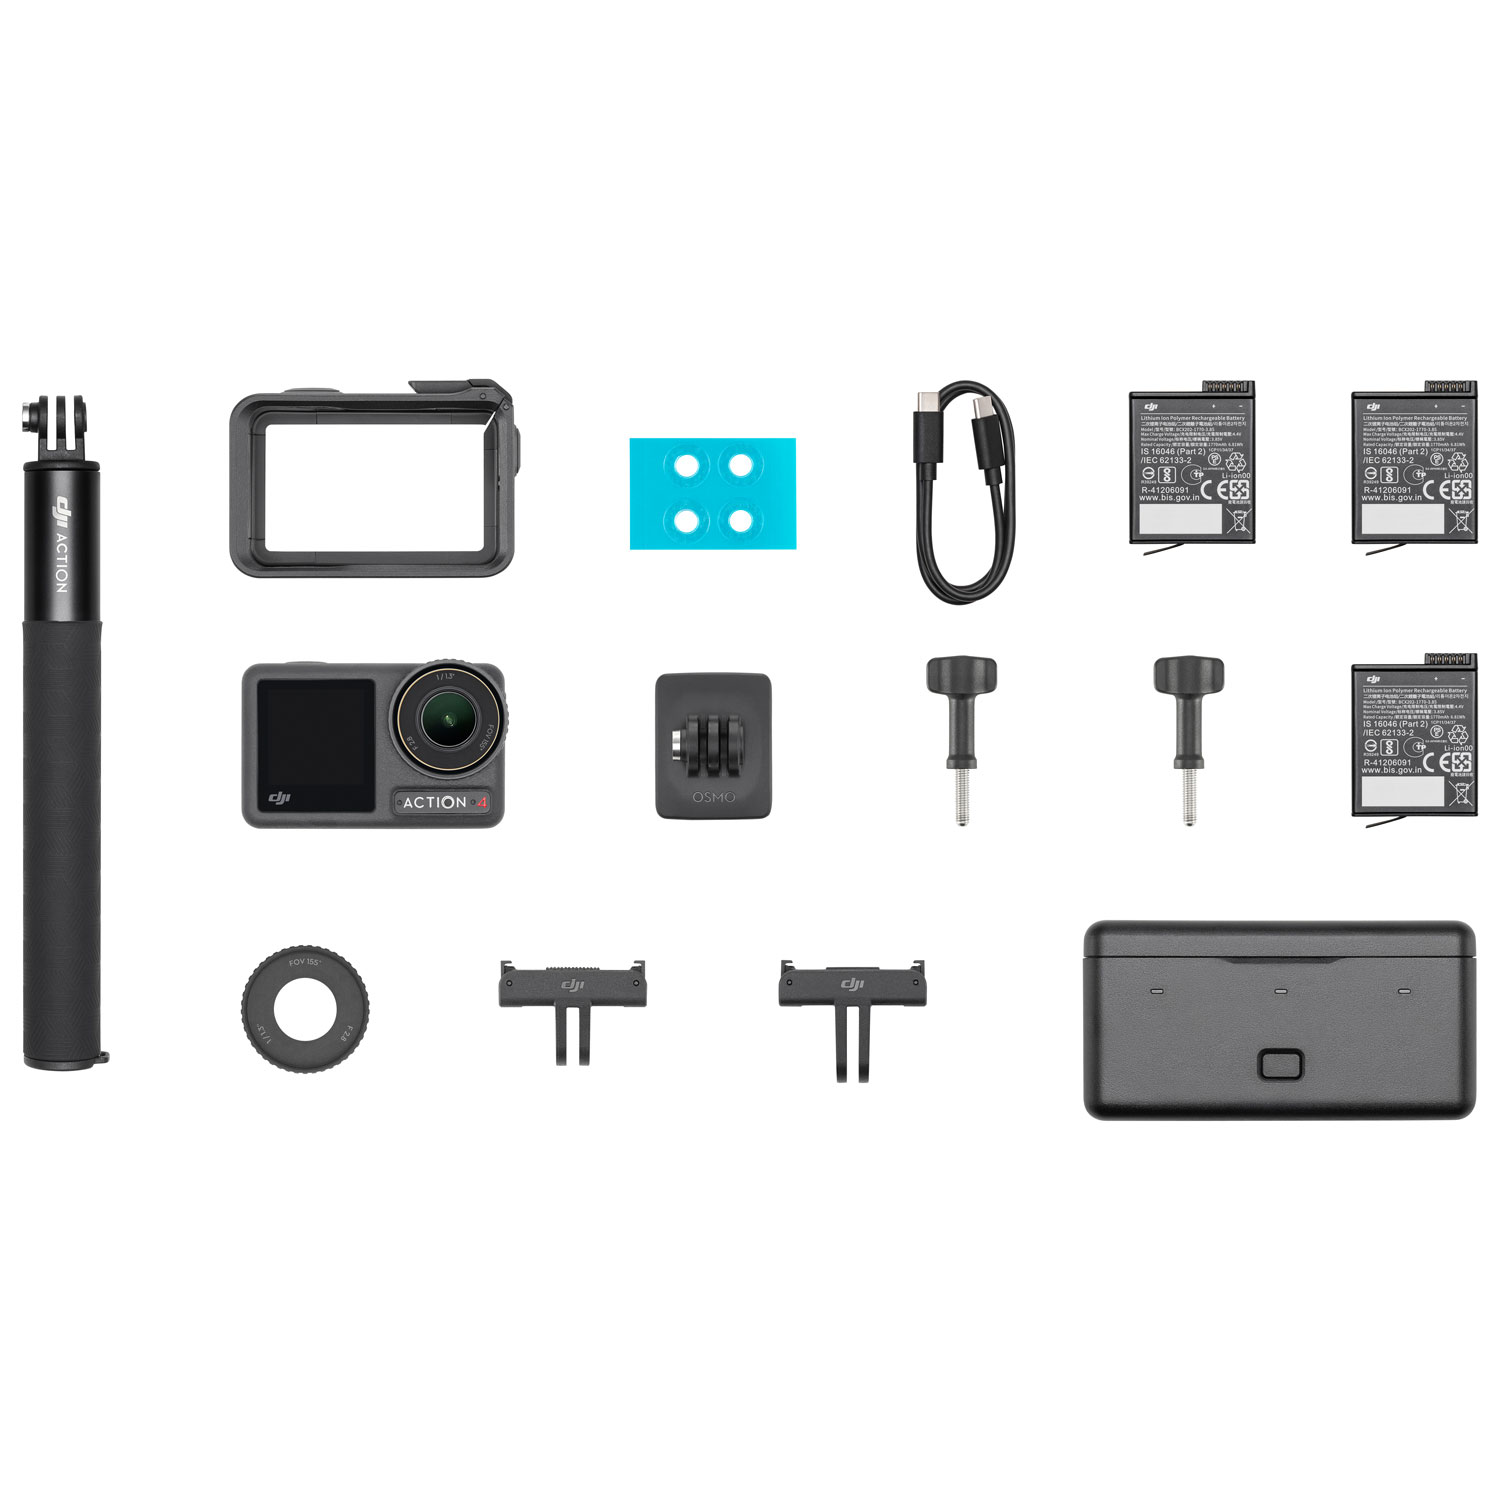 DJI Osmo Action 4 Adventure Combo 4K Action Camera